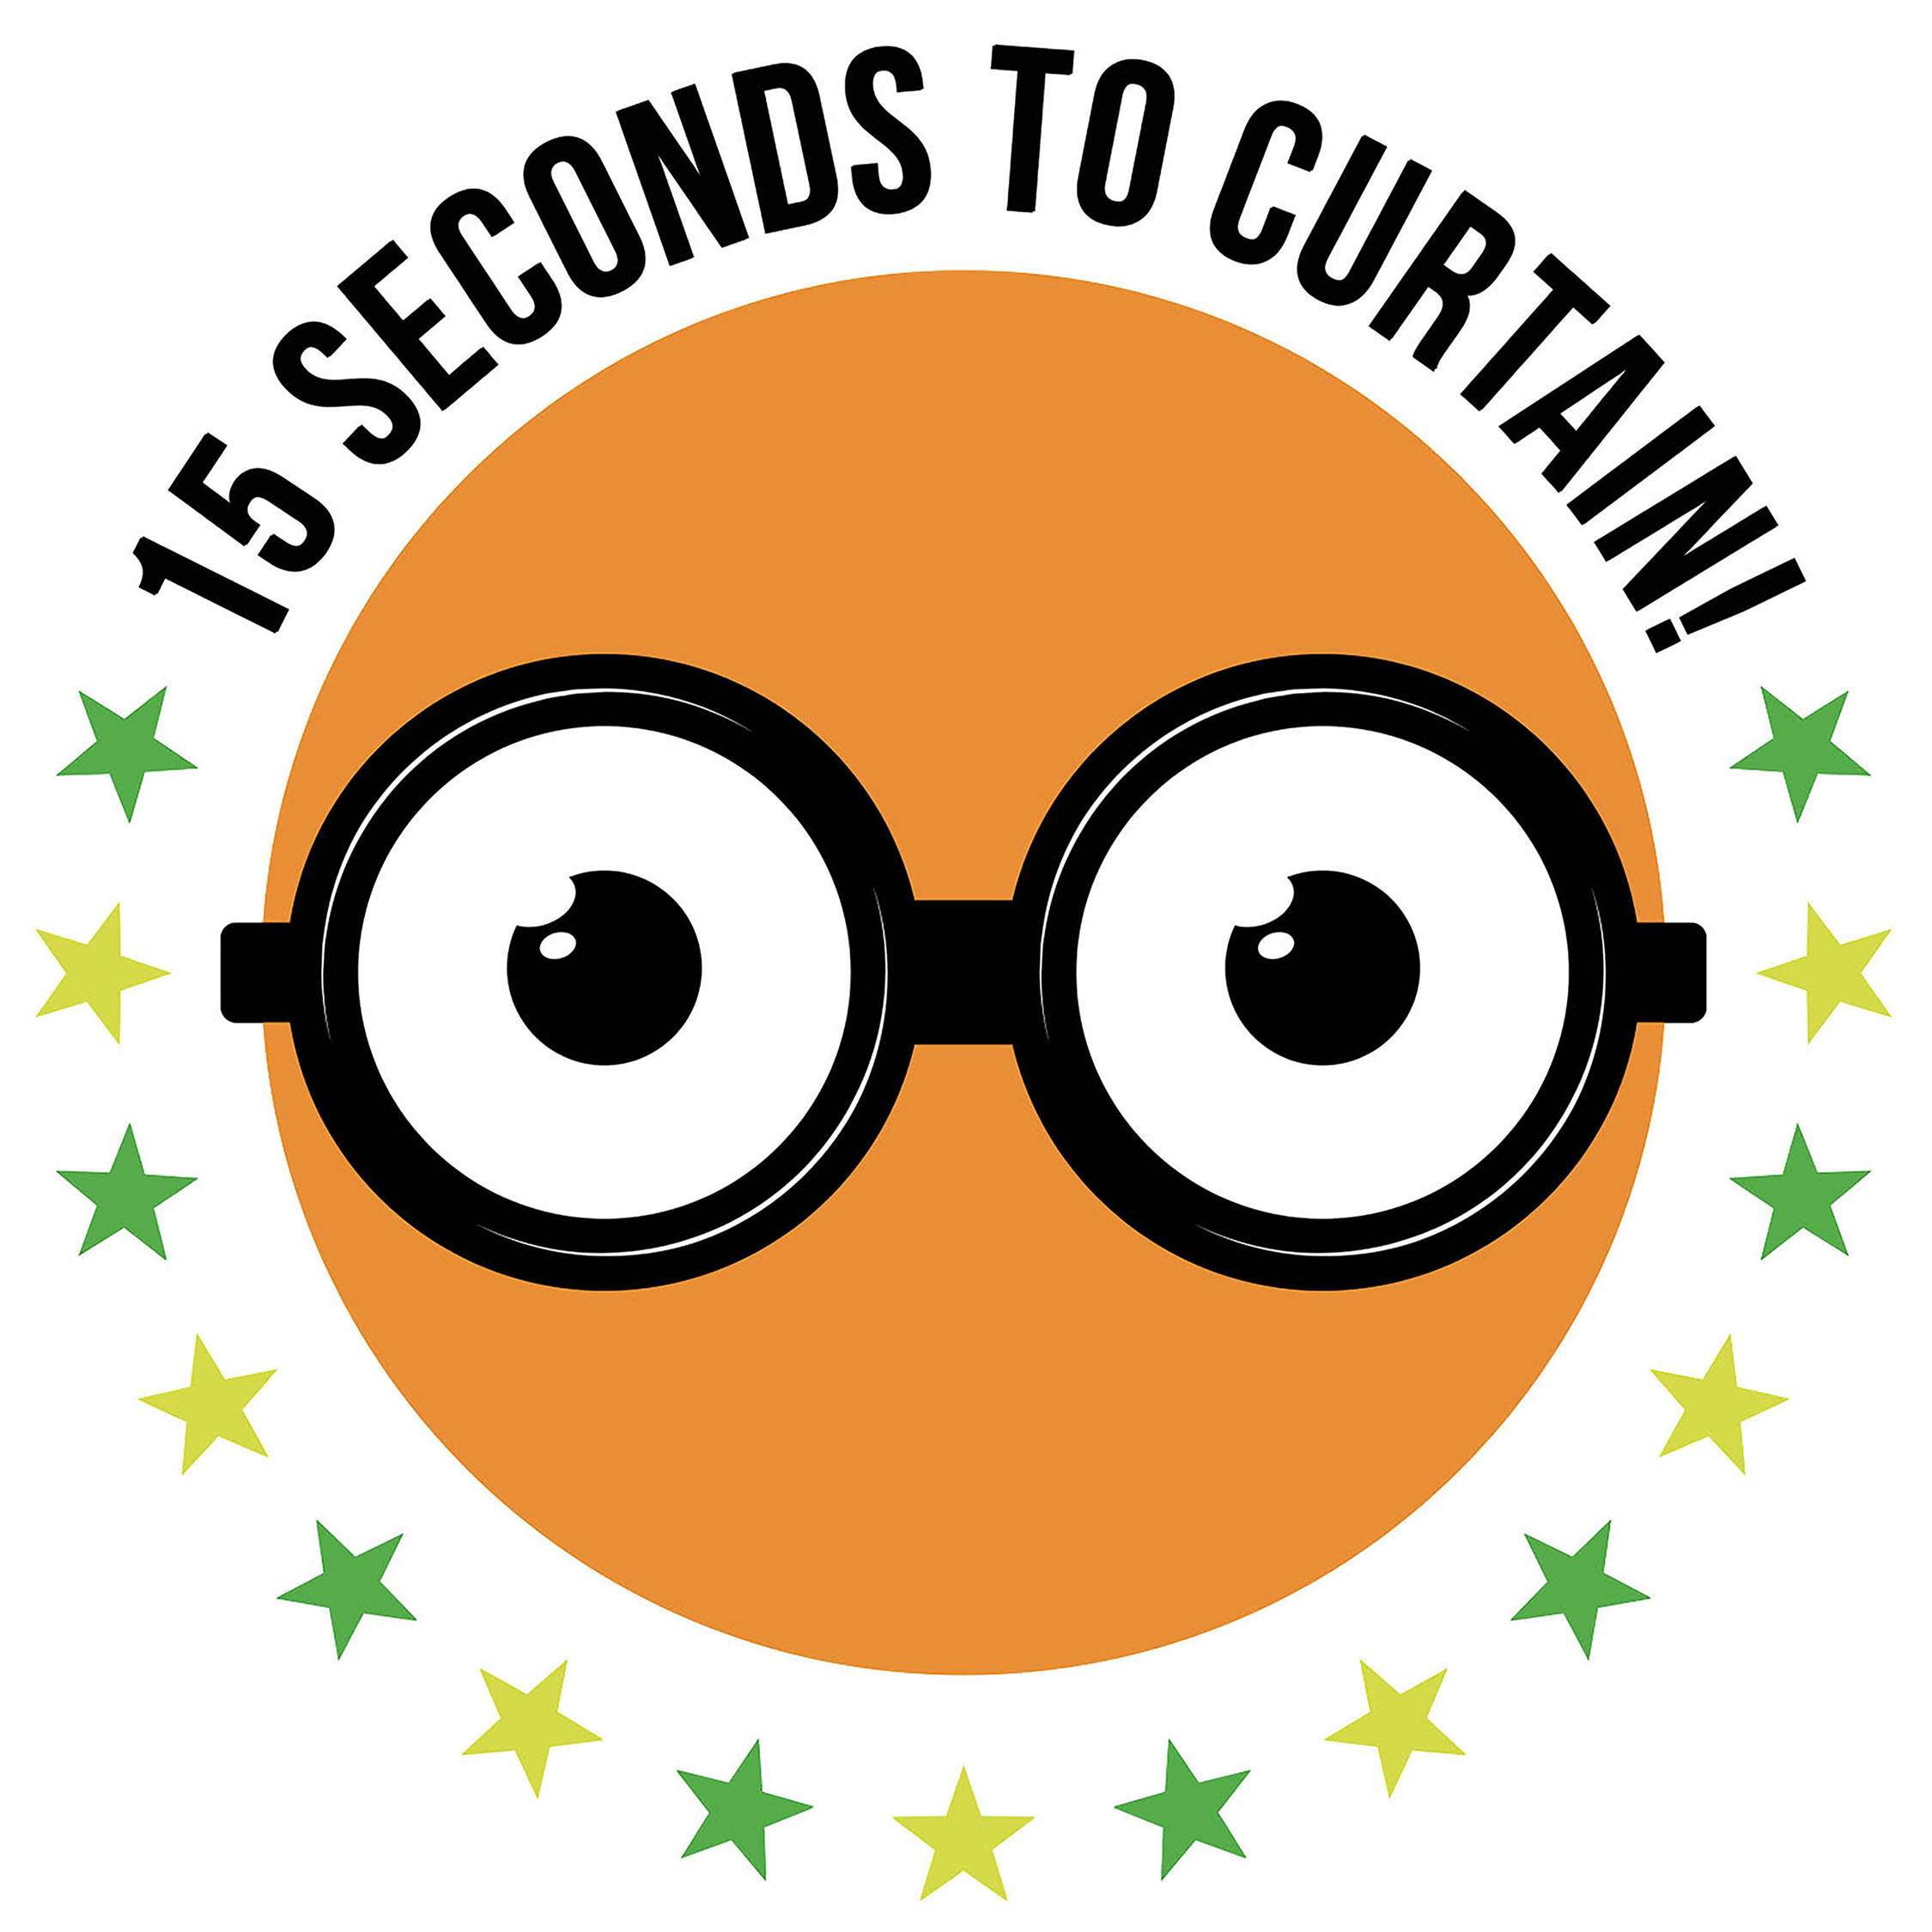 15 Seconds to Curtain – Podcast Landing Page